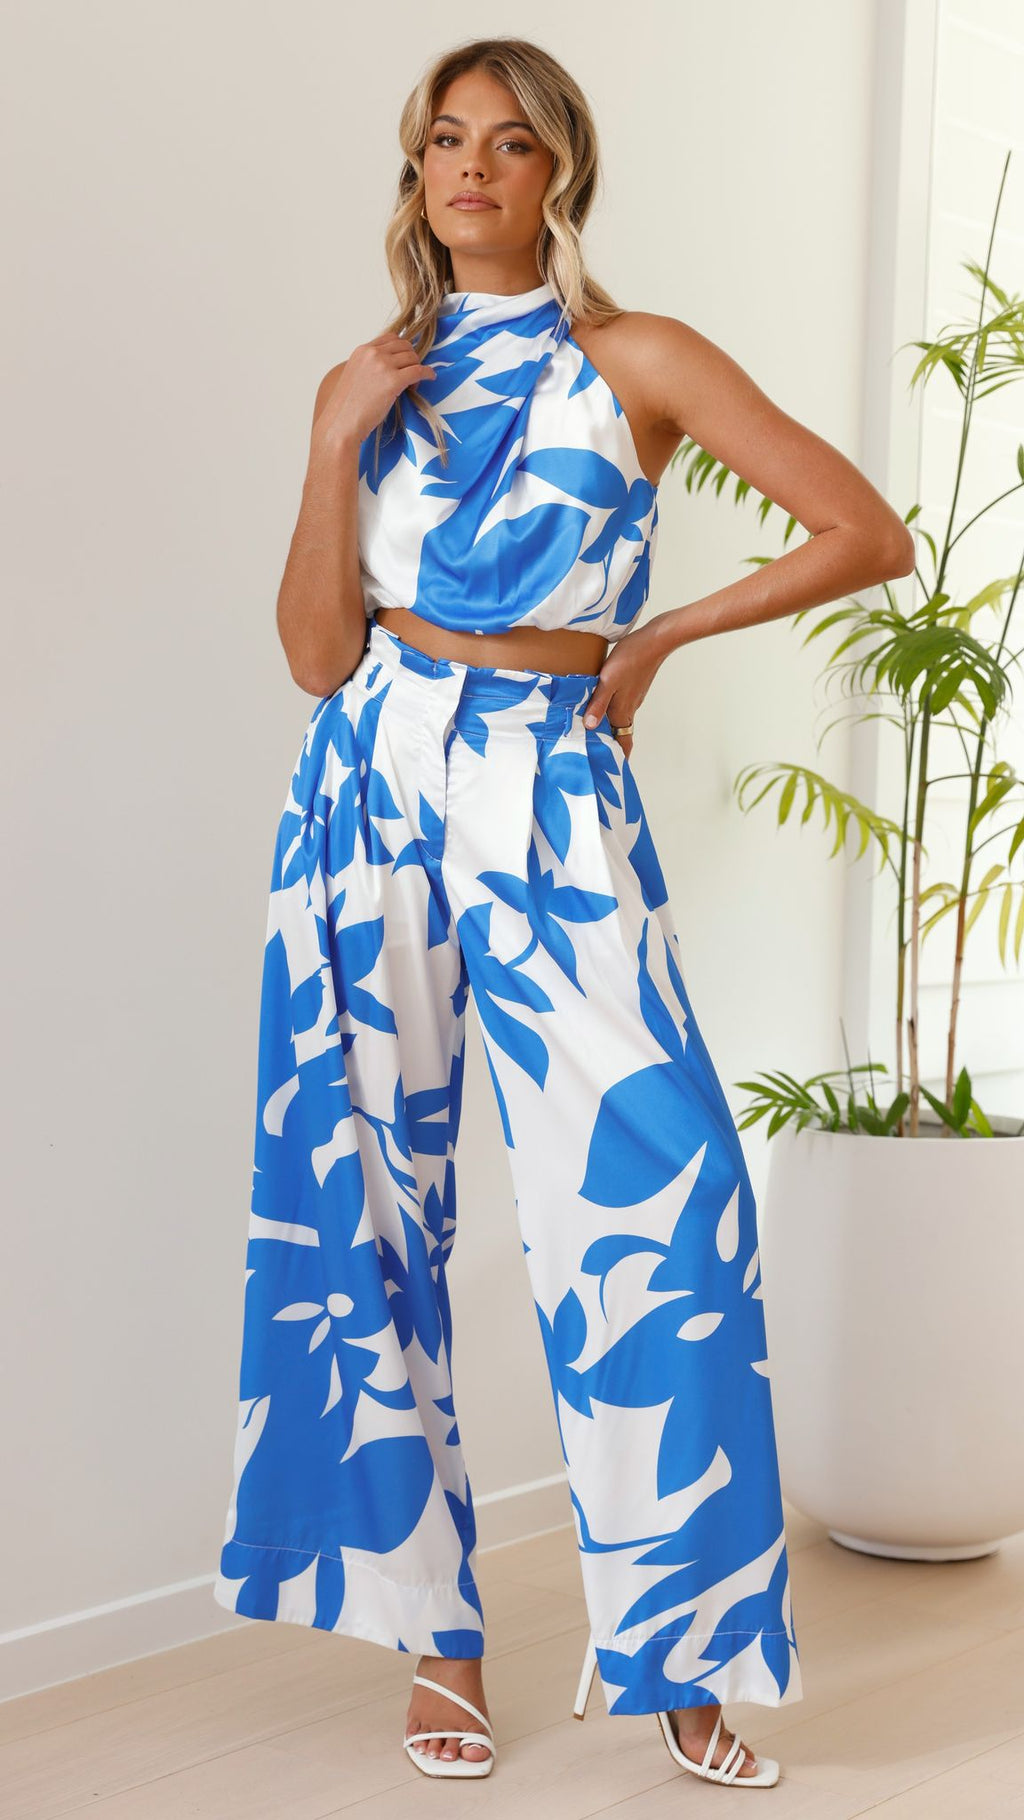 Stella Pants and Top Set - Blue/White Floral